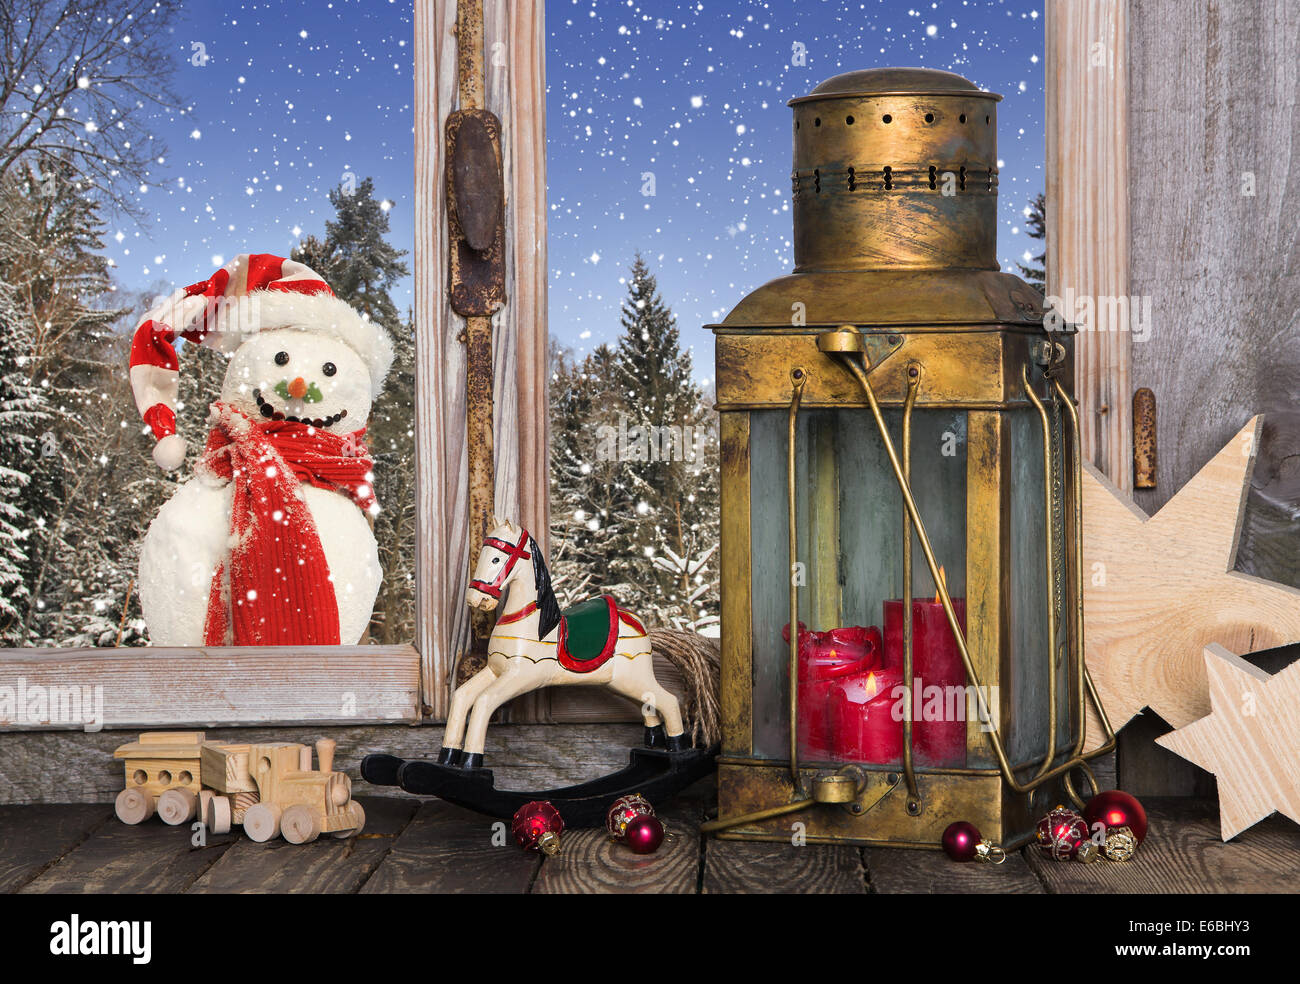 Christmas window decoration with old toys and an old lantern with a red candle. Stock Photo